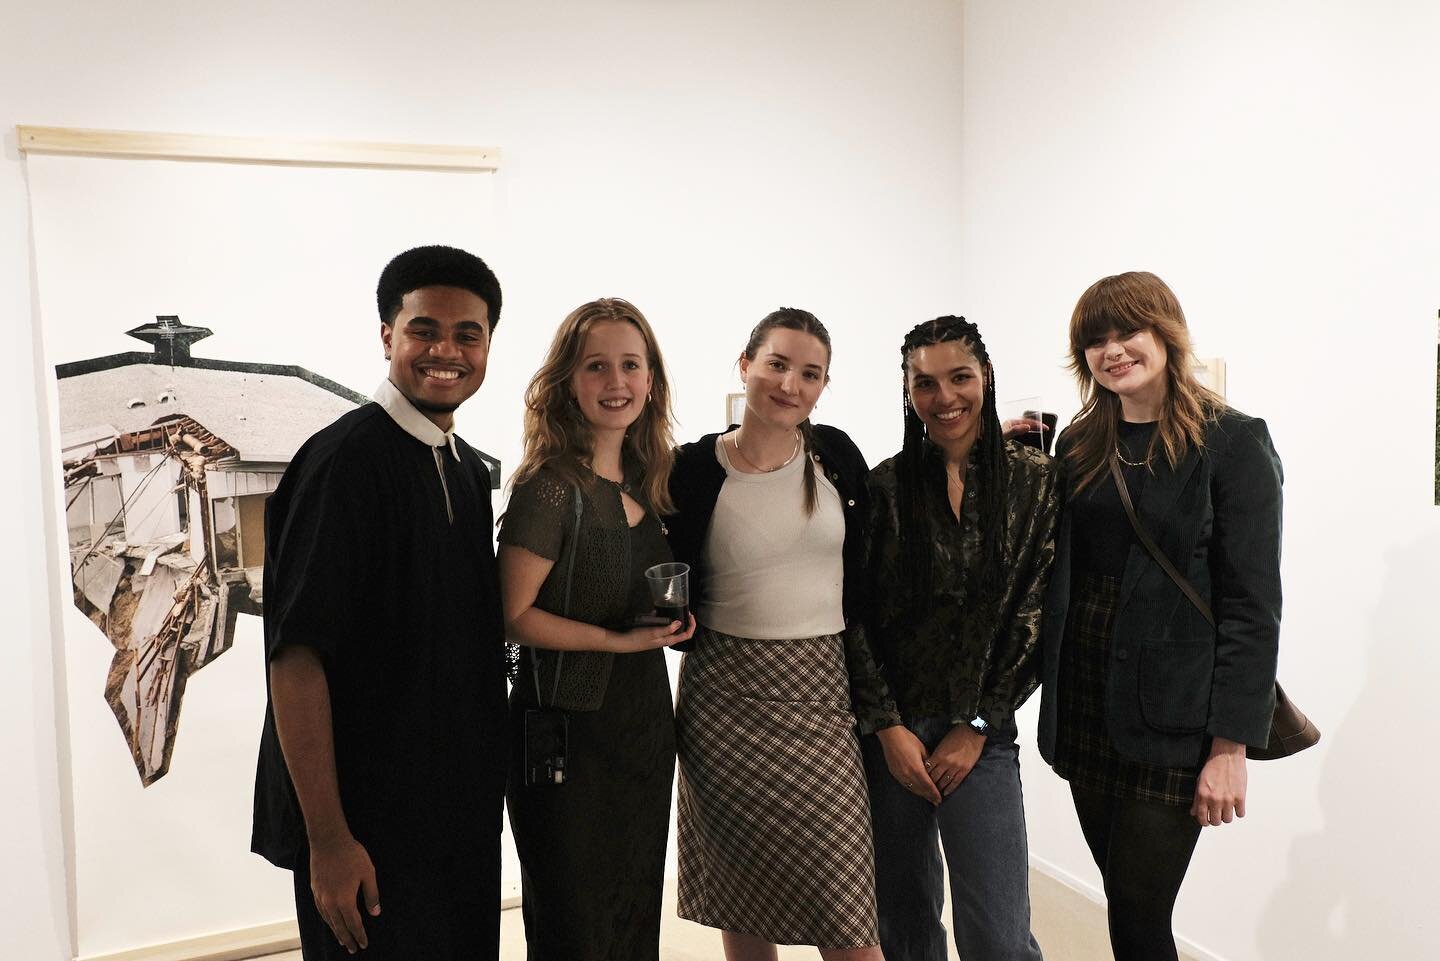 Thank you to everyone who came to the &ldquo;I Used Tape &amp; Glue&rdquo; opening reception!!!! And big congratulations to the artists @__kaylaward__ @aanikoobijigan @molly_steels_photography @r8him @peytonkeelercox and the wonderful curator @hansom